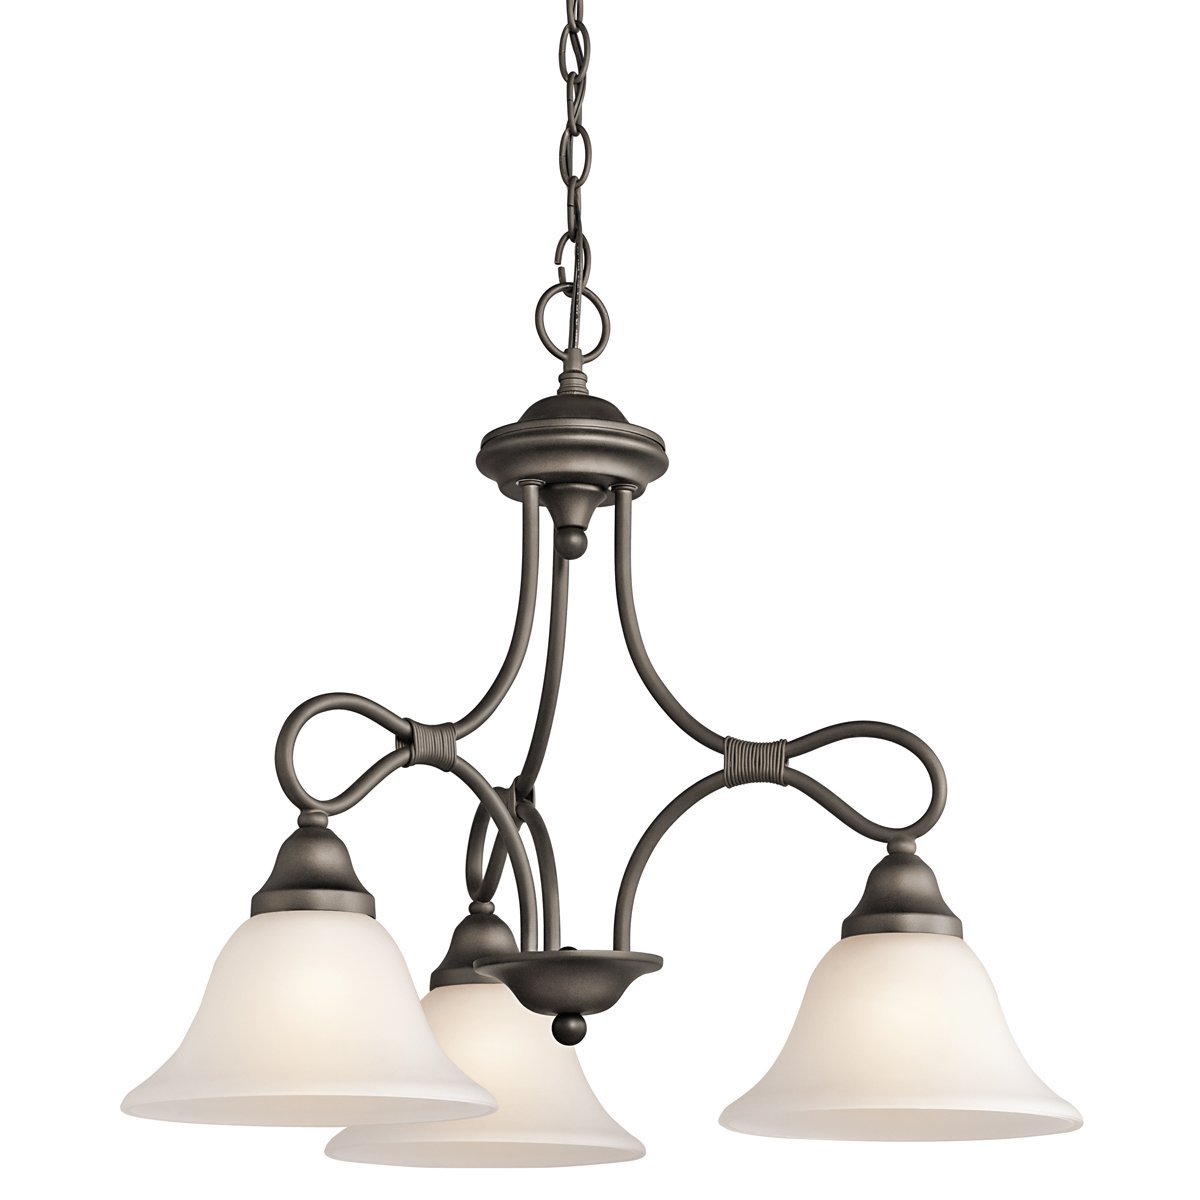 Kichler Lighting 2556OZ Stafford 3-Light Chandelier, Old Bronze Finish with Satin Etched Glass Shades